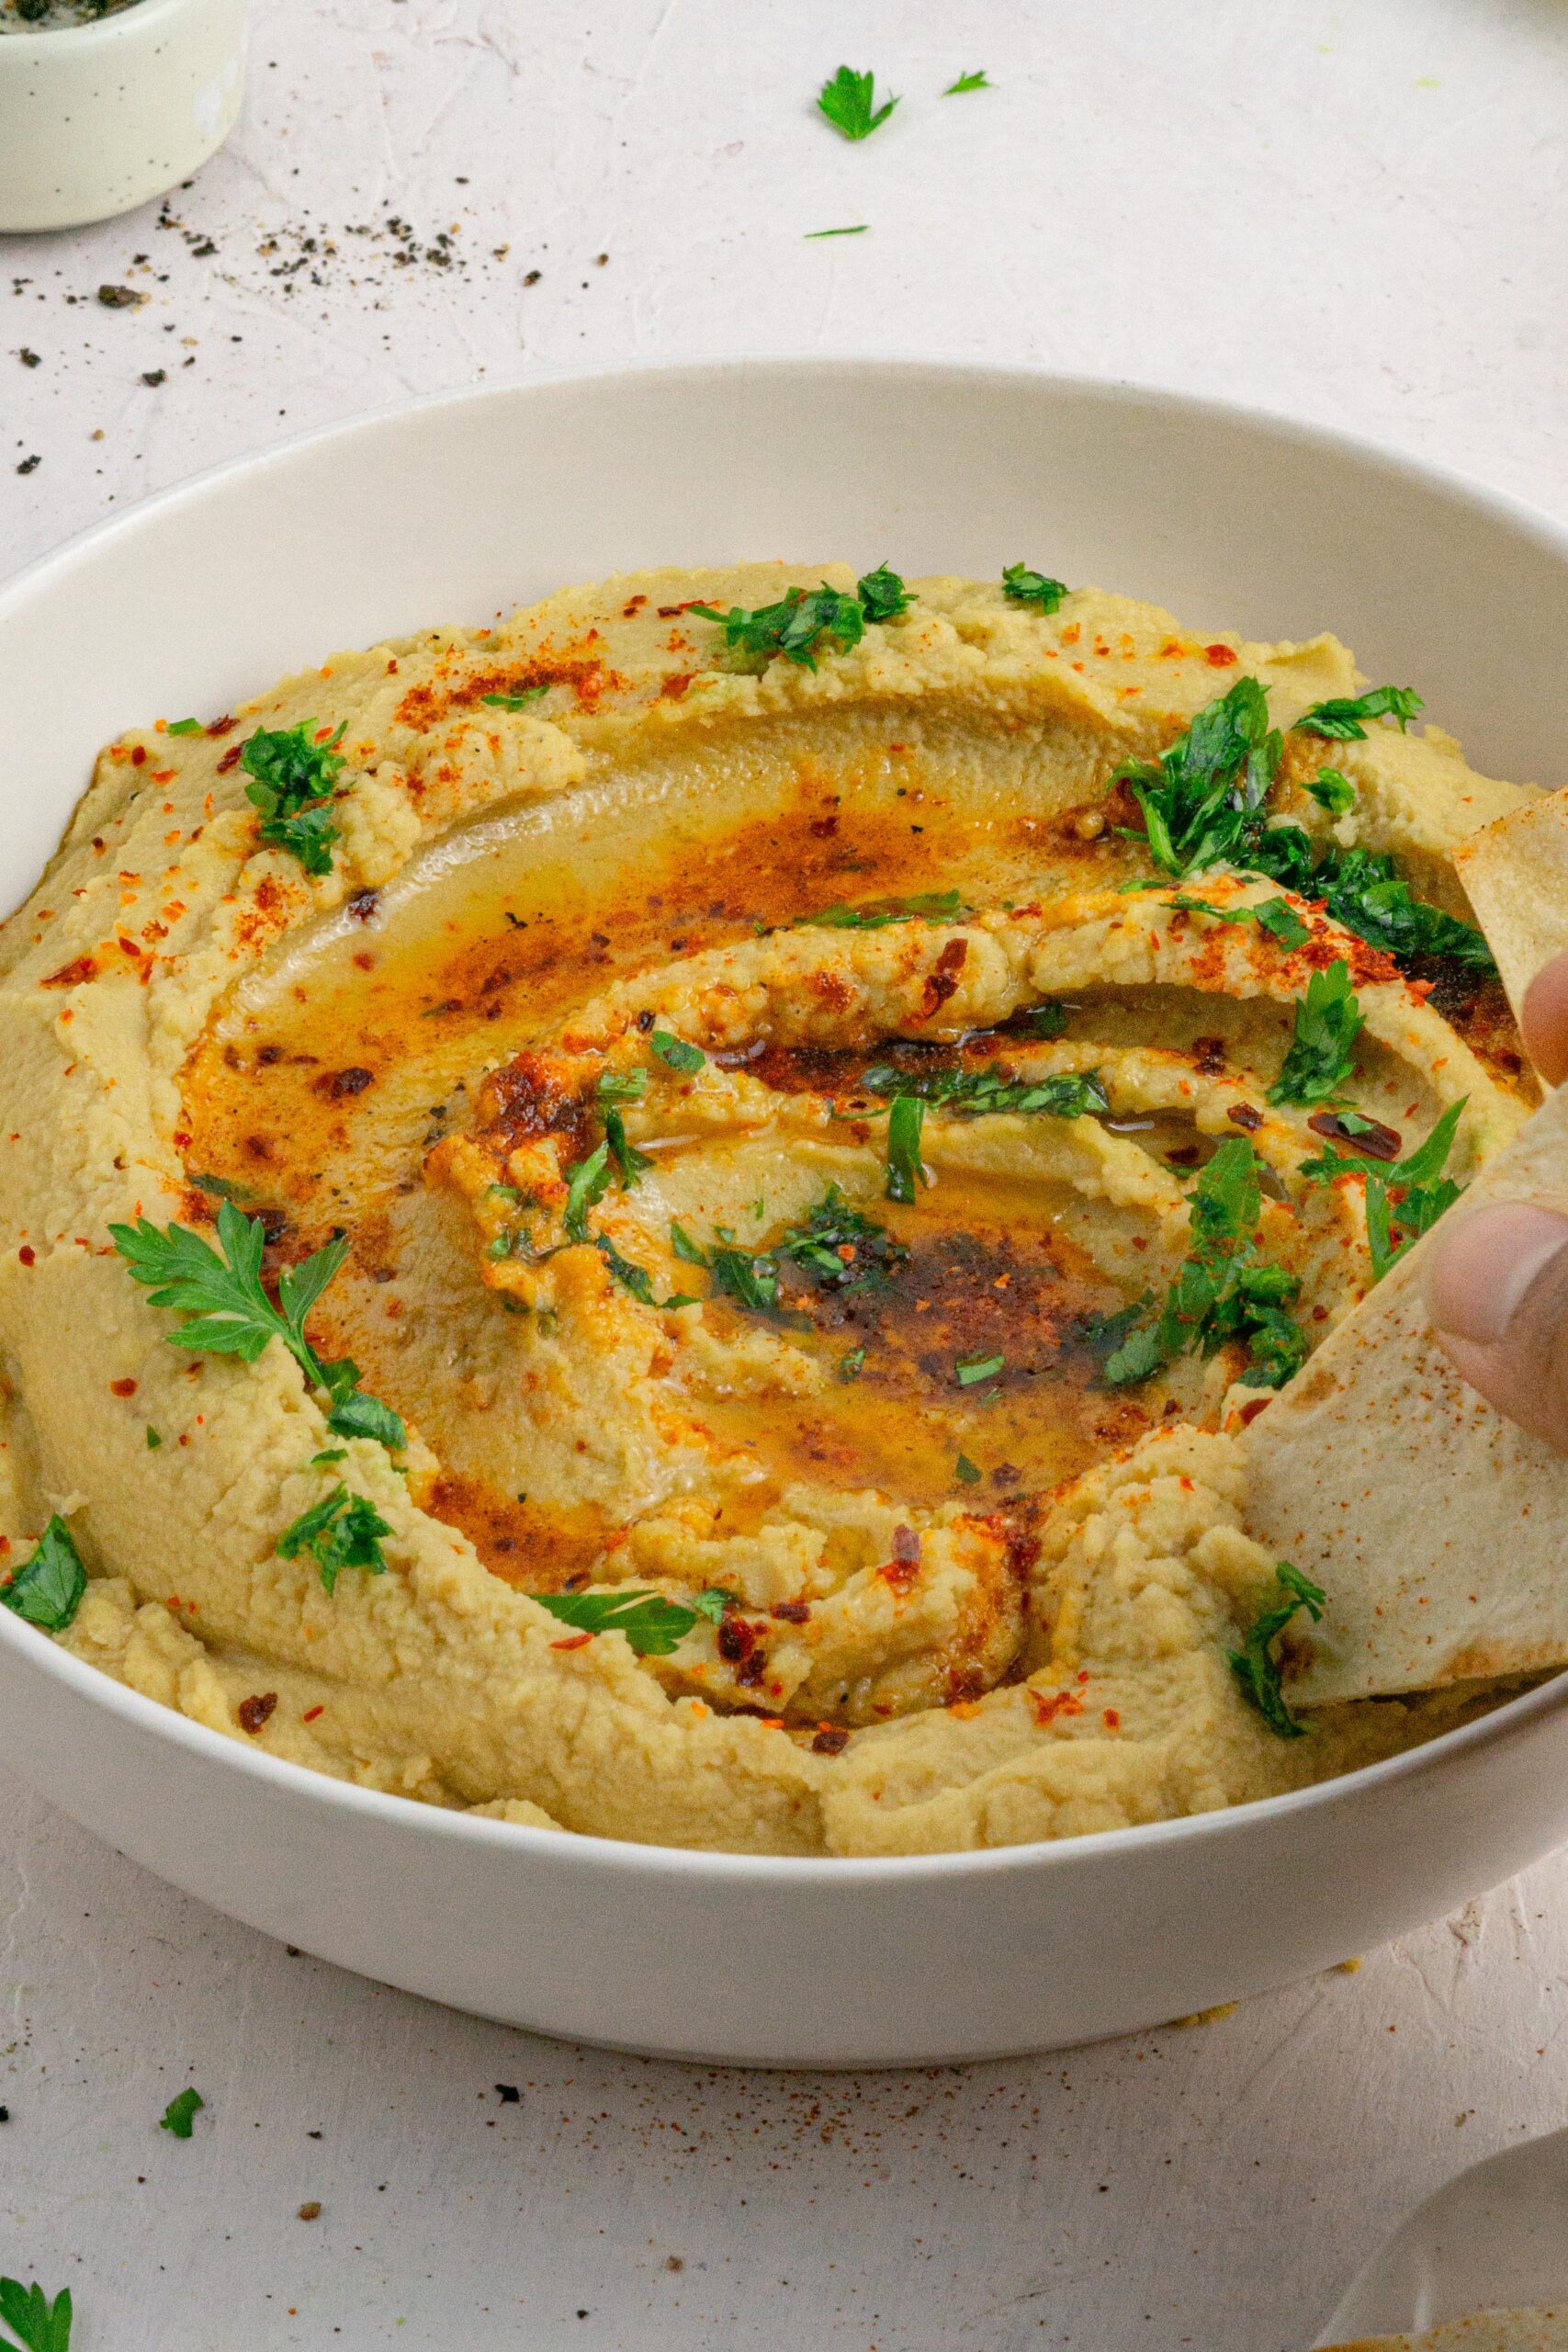 red lentil hummus with tortilla chips being dipped into the bowl